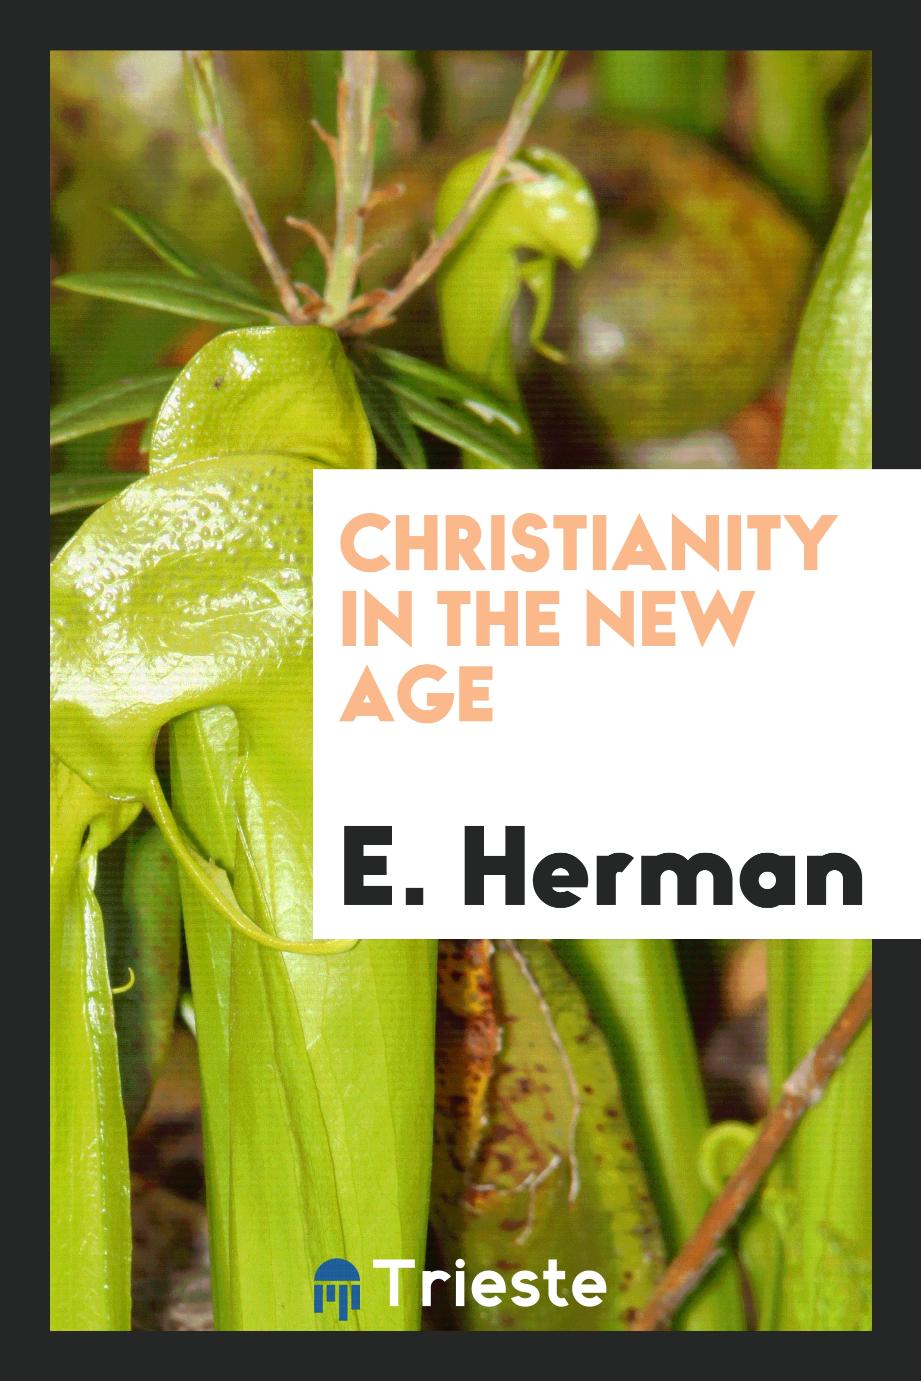 Christianity in the new age